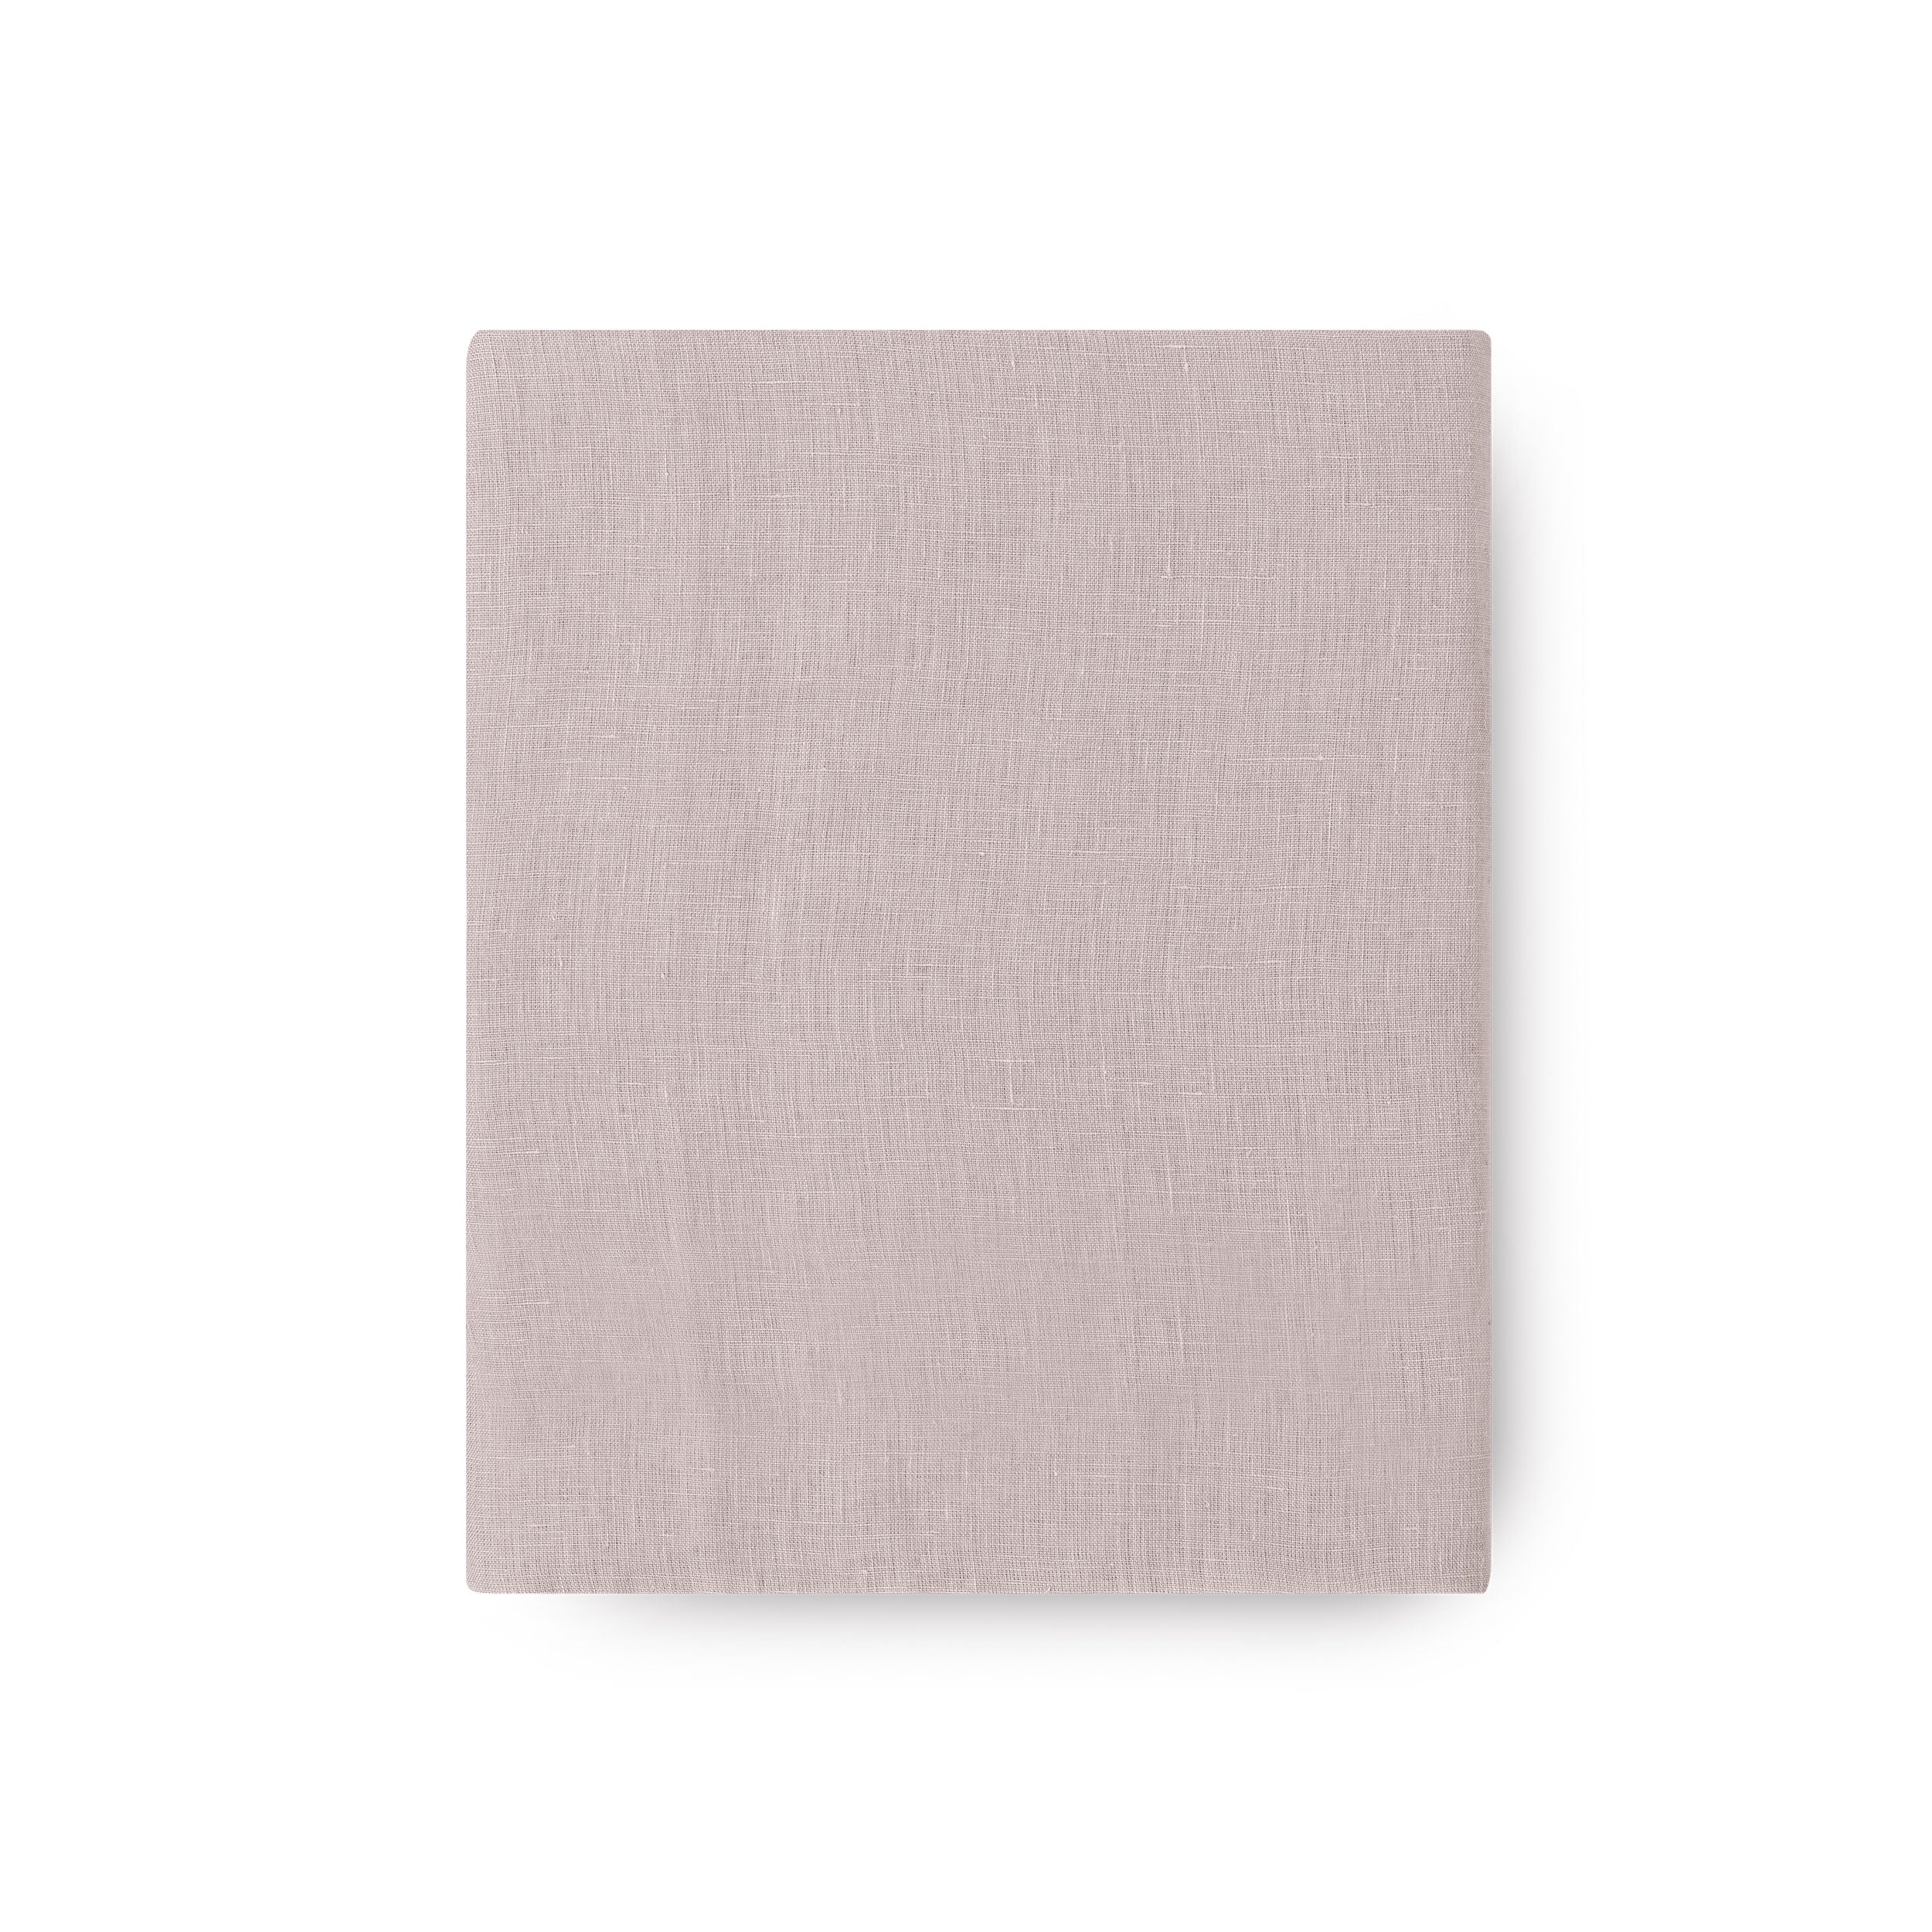 Maia - 100% Washed Linen Oxford Pillowcase